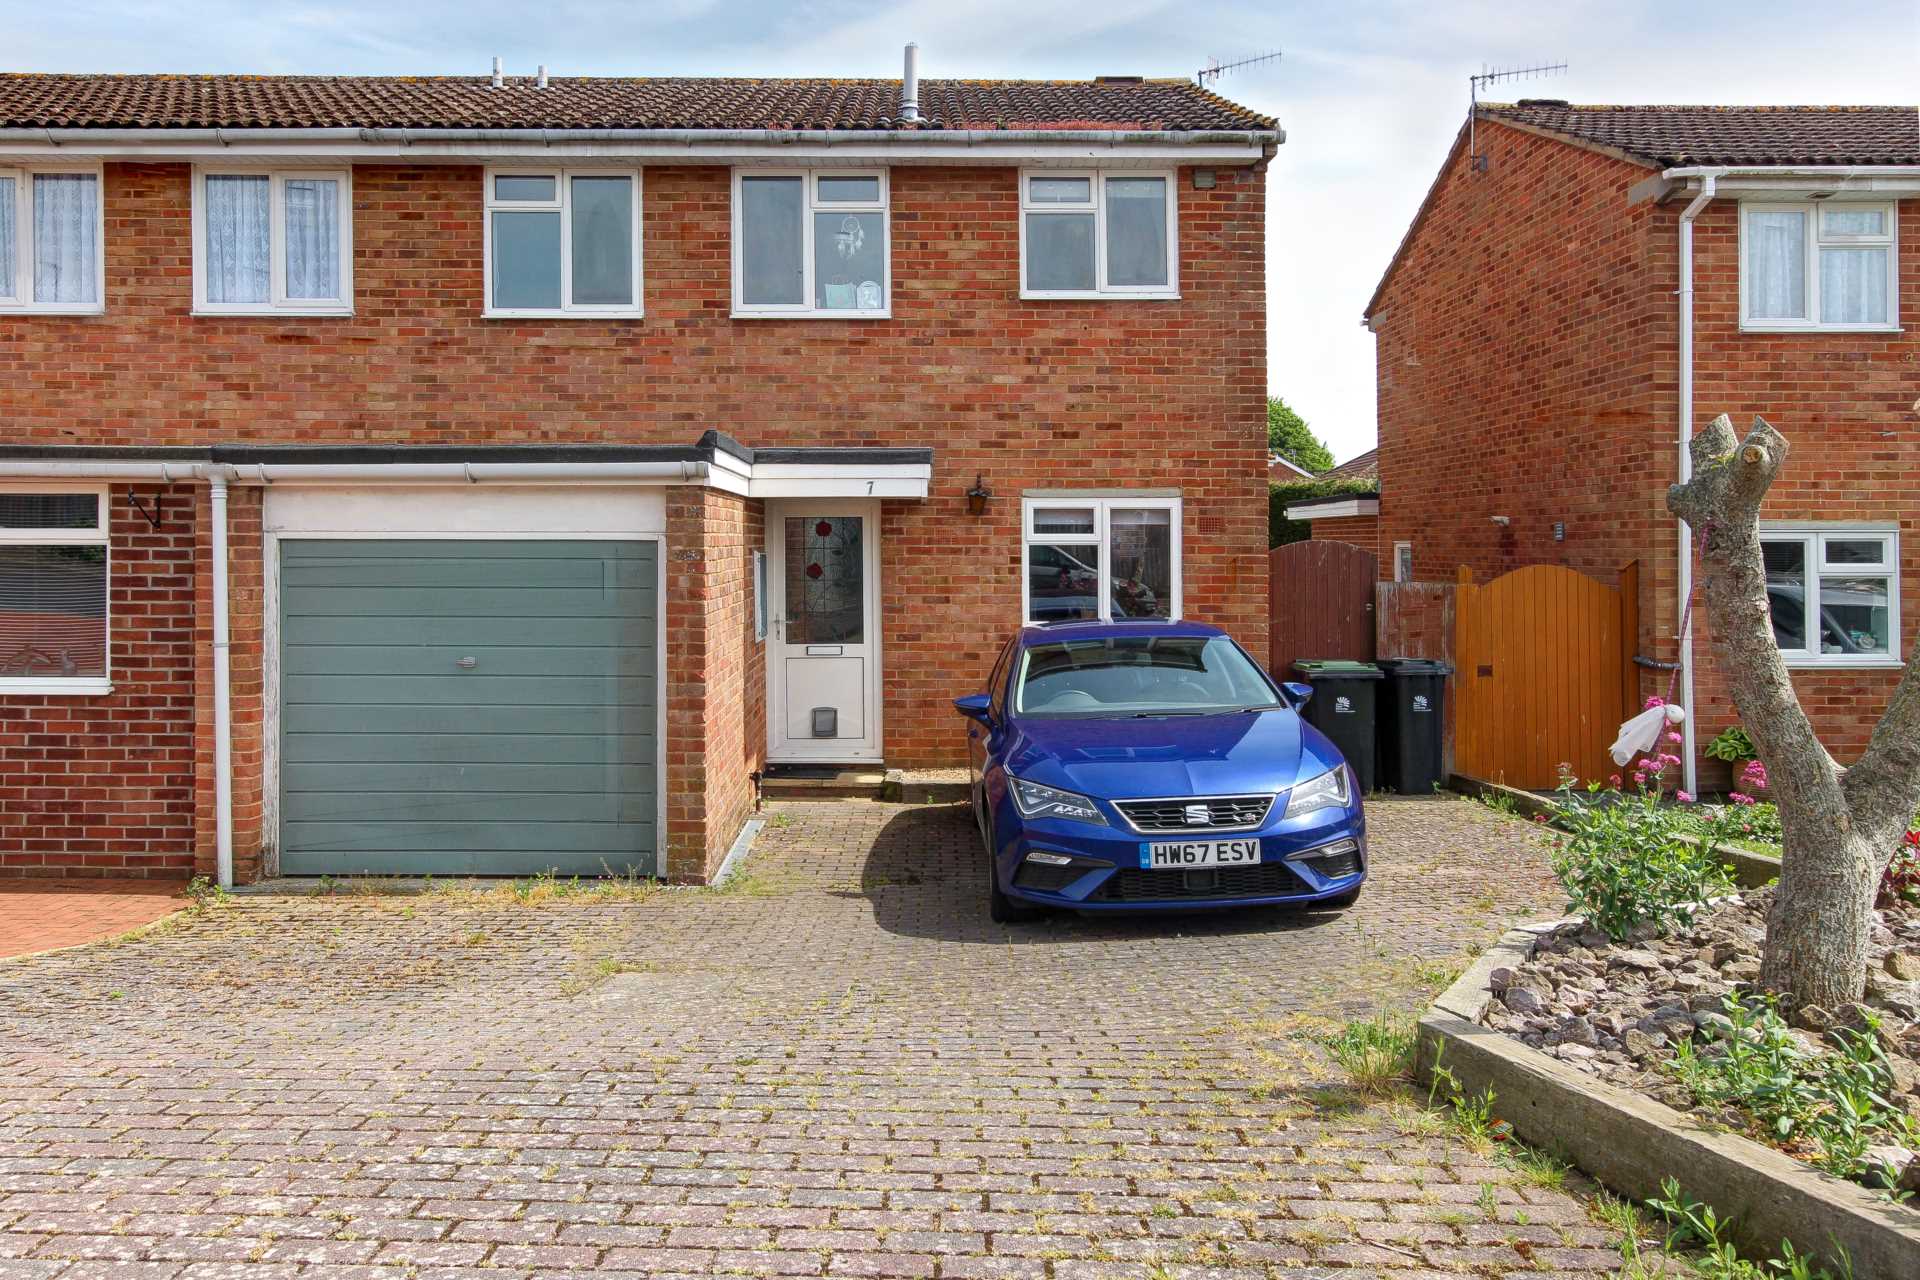 3 bed end of terrace house for sale in Hilcot Way, Blandford Forum, DT11